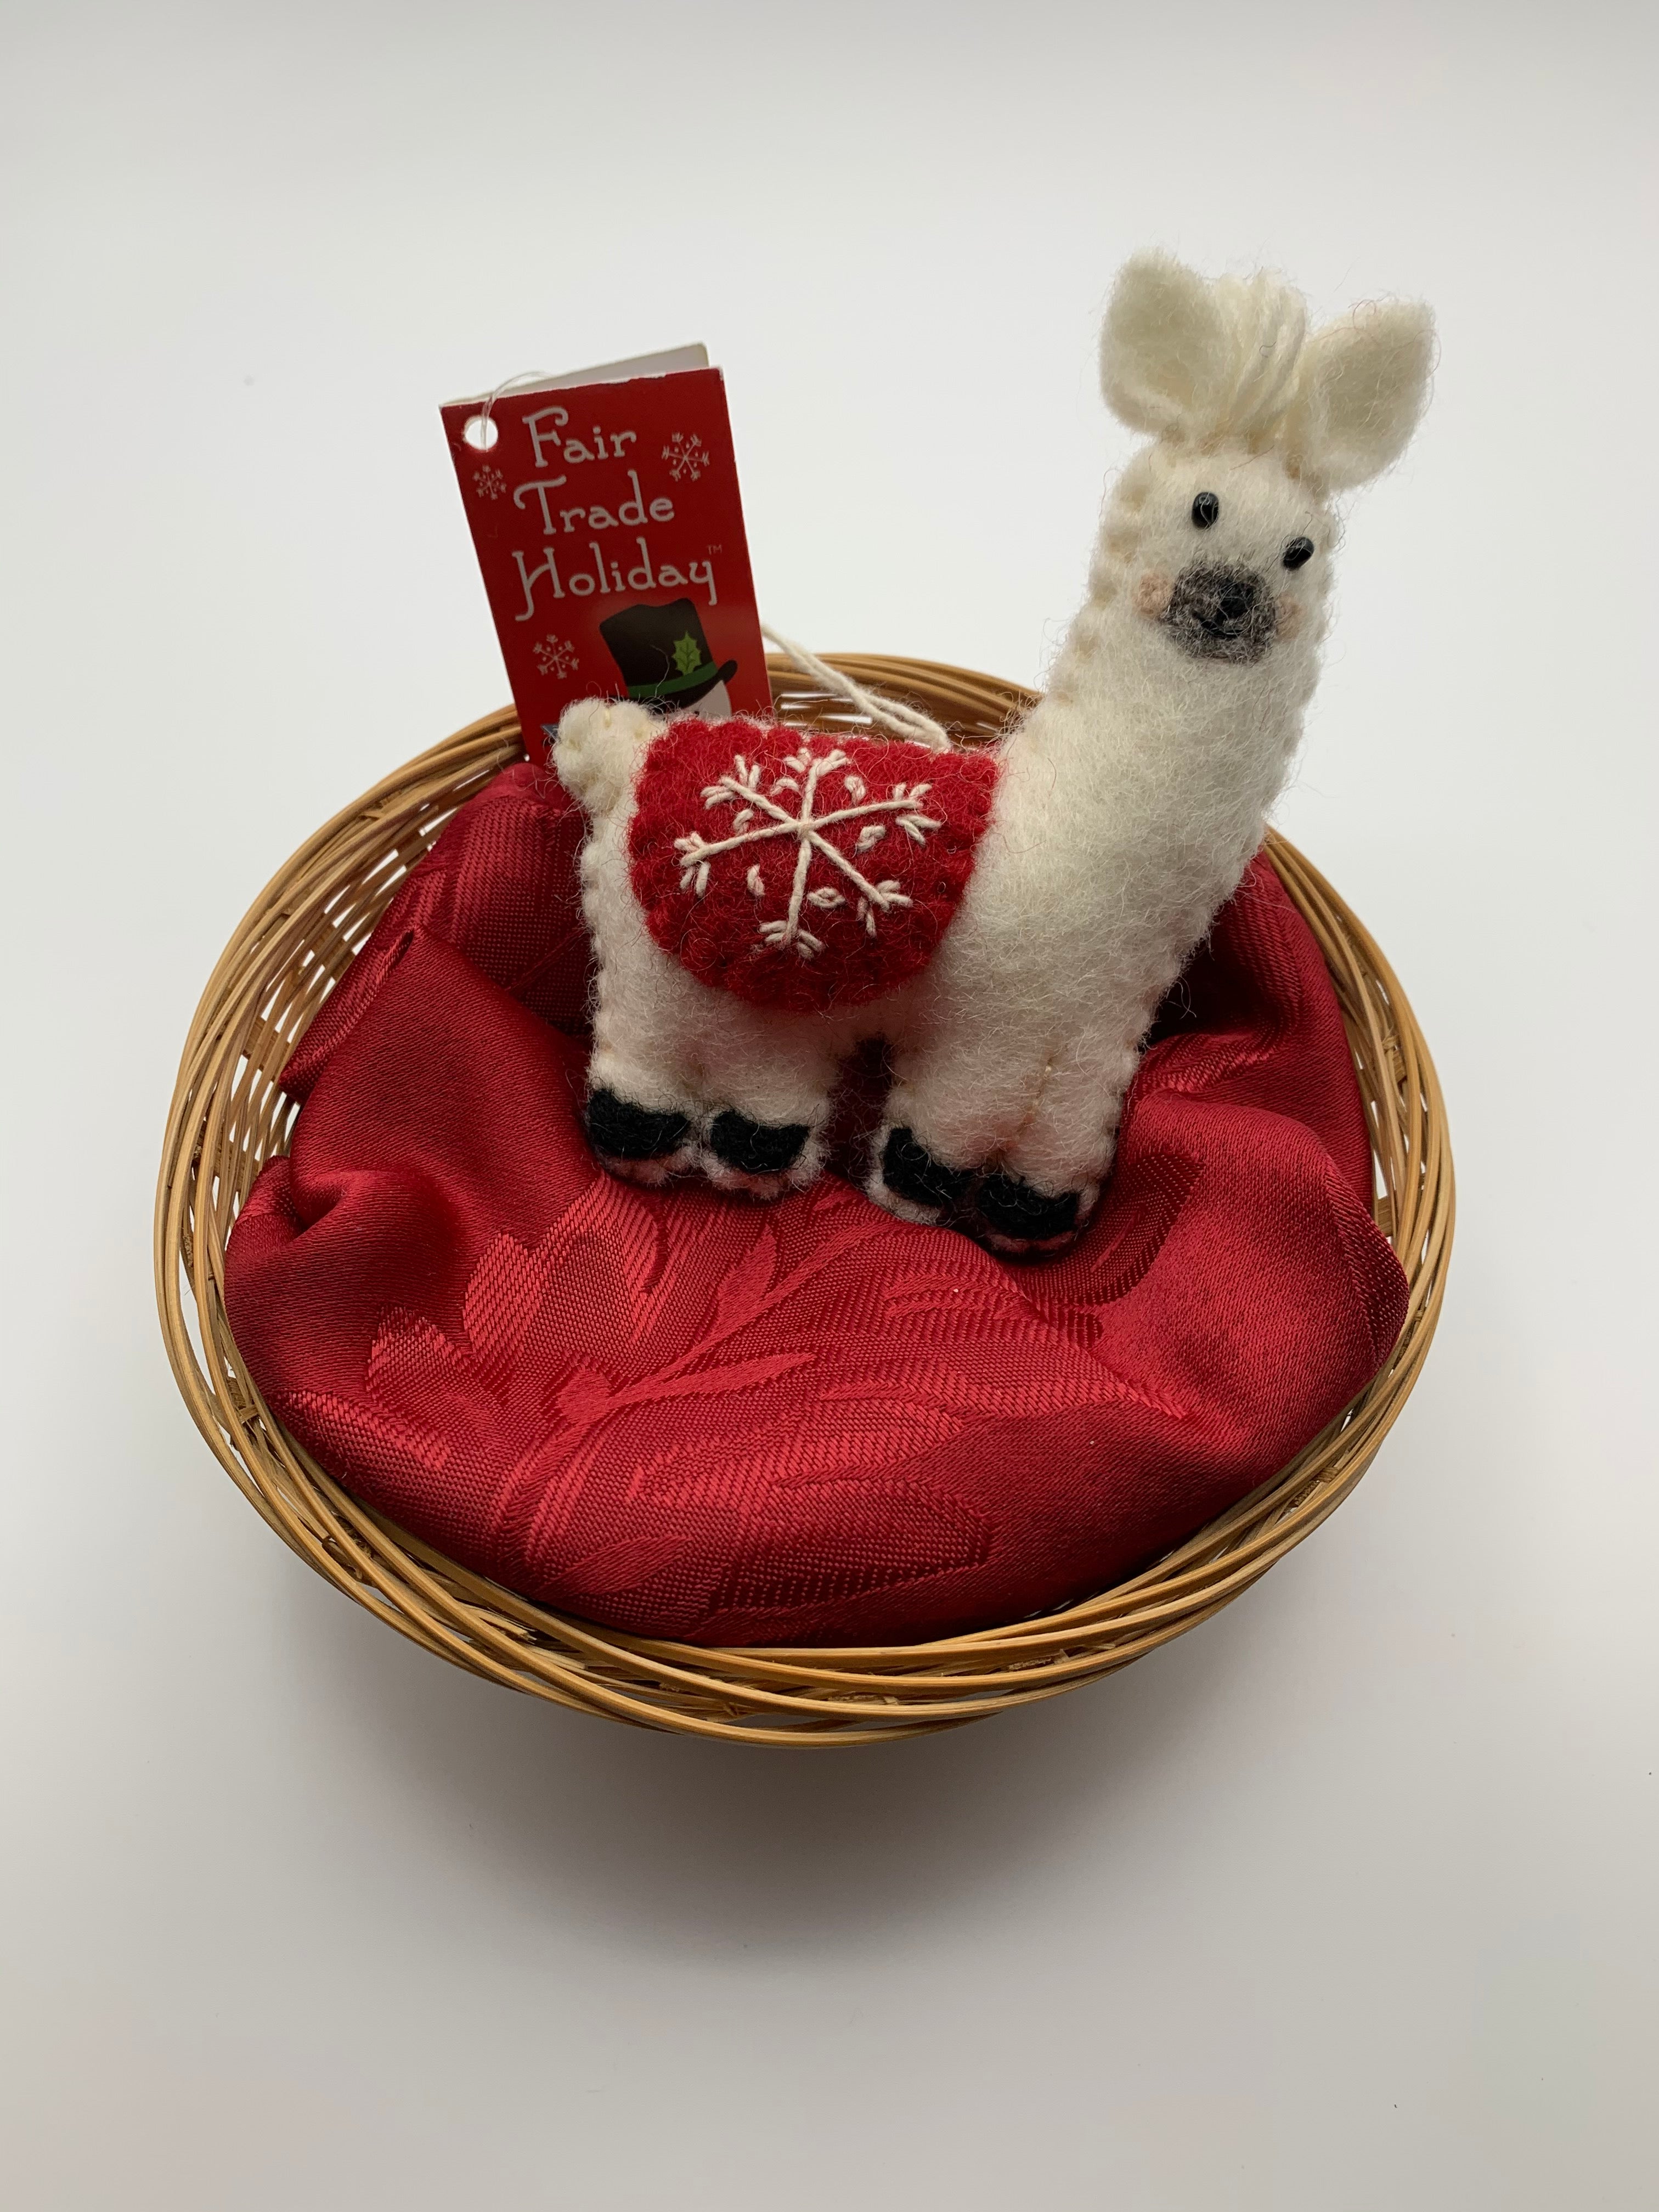 This llama Christmas ornament is hand-crafted (fair trade)  and made of 100% natural hand-felted wool. It is off-white with a gray muzzle and black accents (hooves, nose, etc.) has a cute tuft of (yarn) hair between his ears & wears a rounded red blanket on its back with a 'signature' (white) snowflake on it. It is approximately 4.5"x3.5".  It comes with a detachable fair trade holiday "to/from" tag to use is giving as a gift.